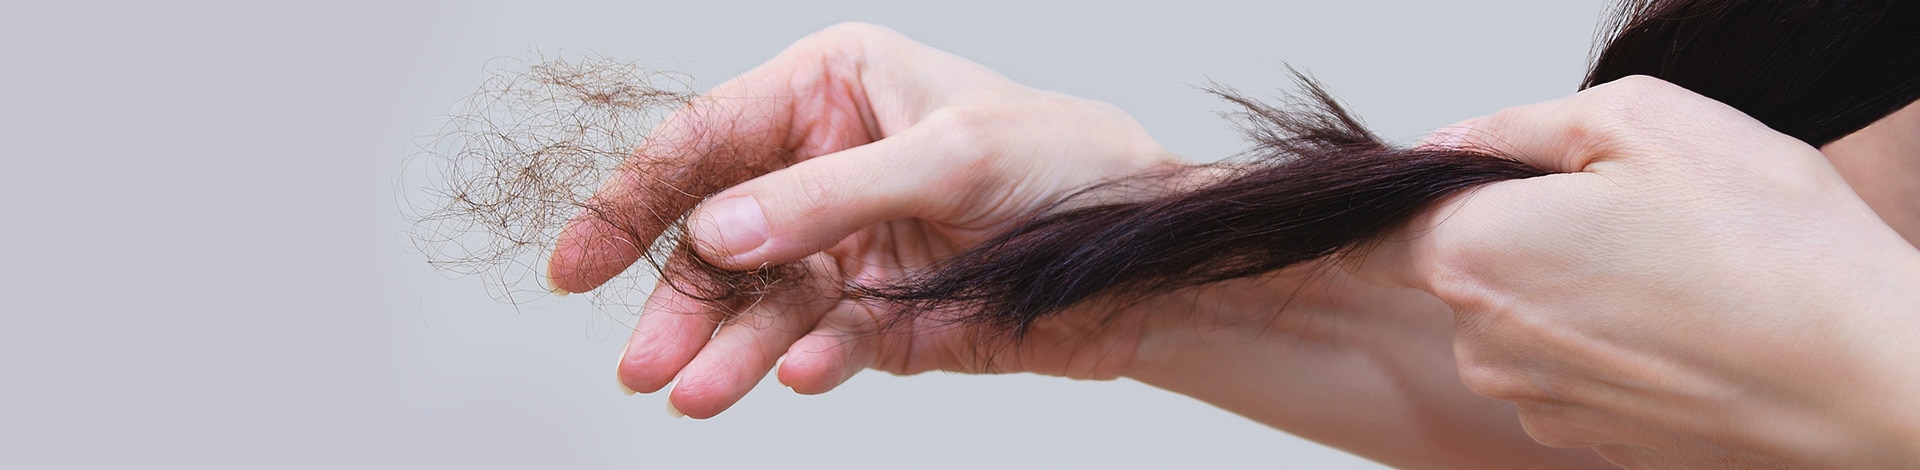 Women looking at hair clump in hand Text